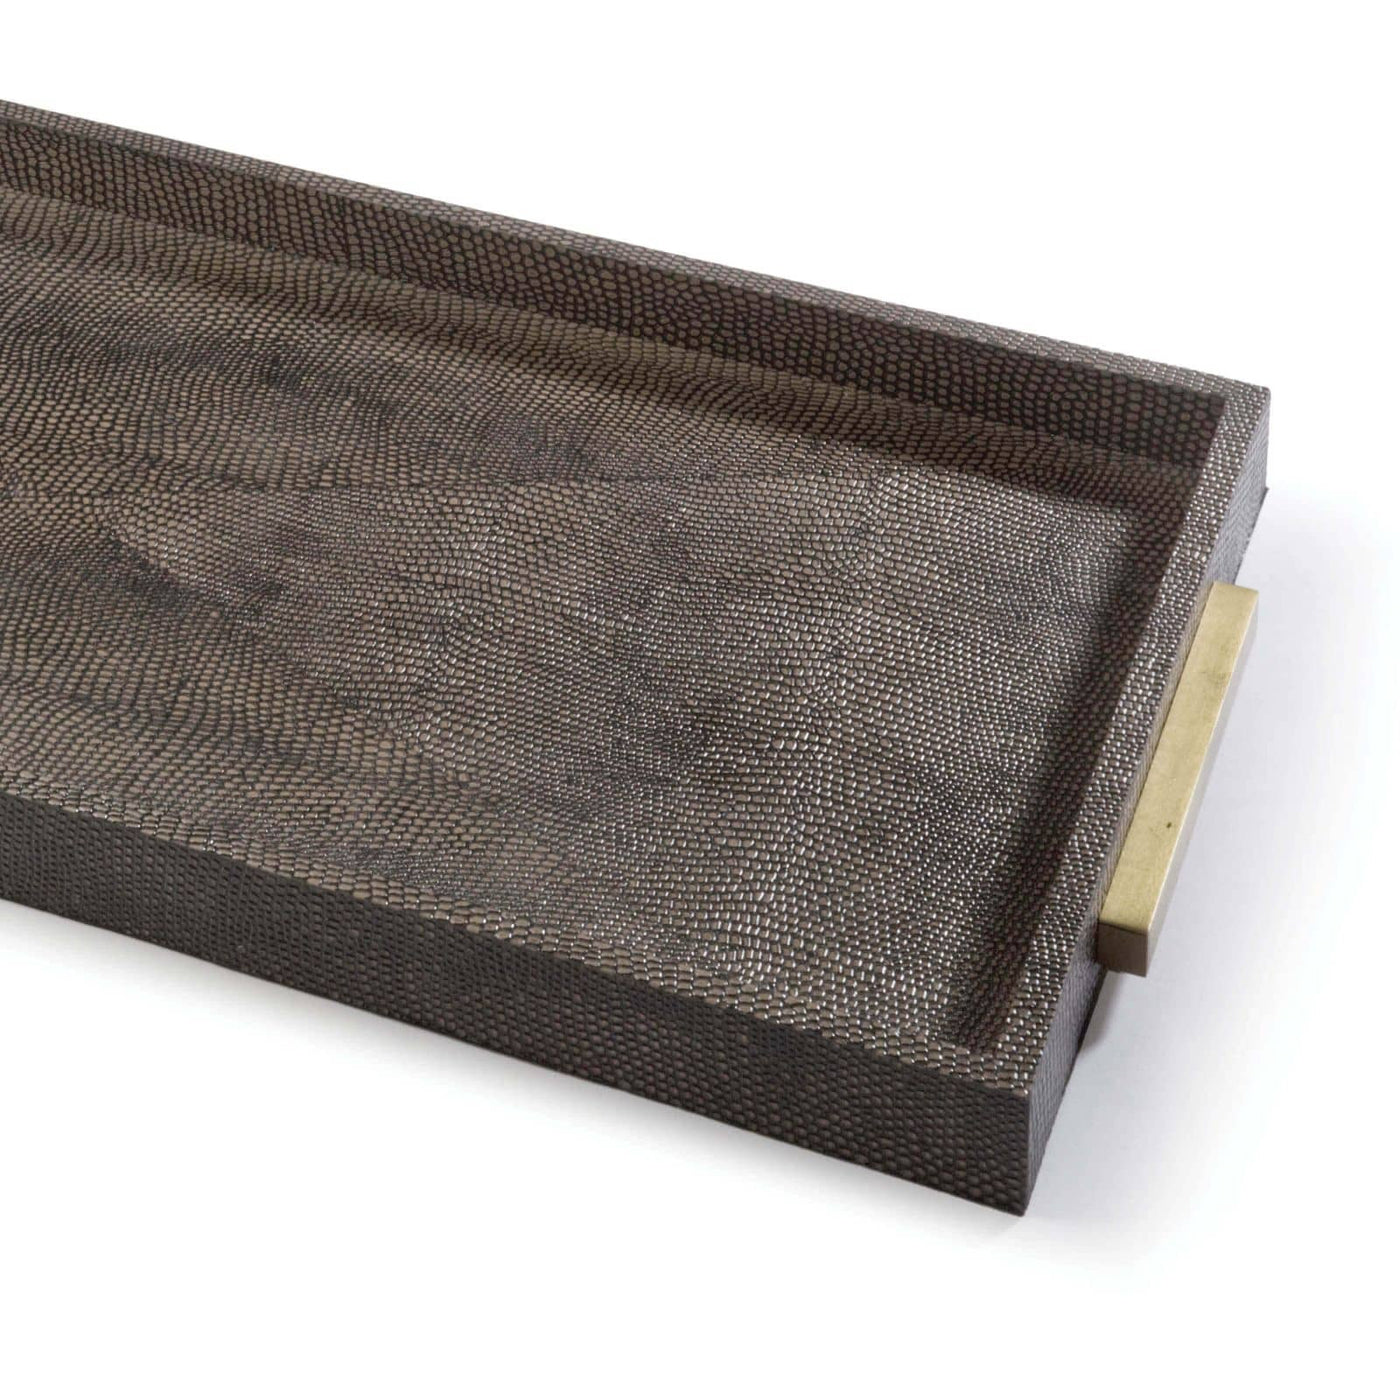 TRAY BROWN SNAKE SHAGREEN RECTANGLE